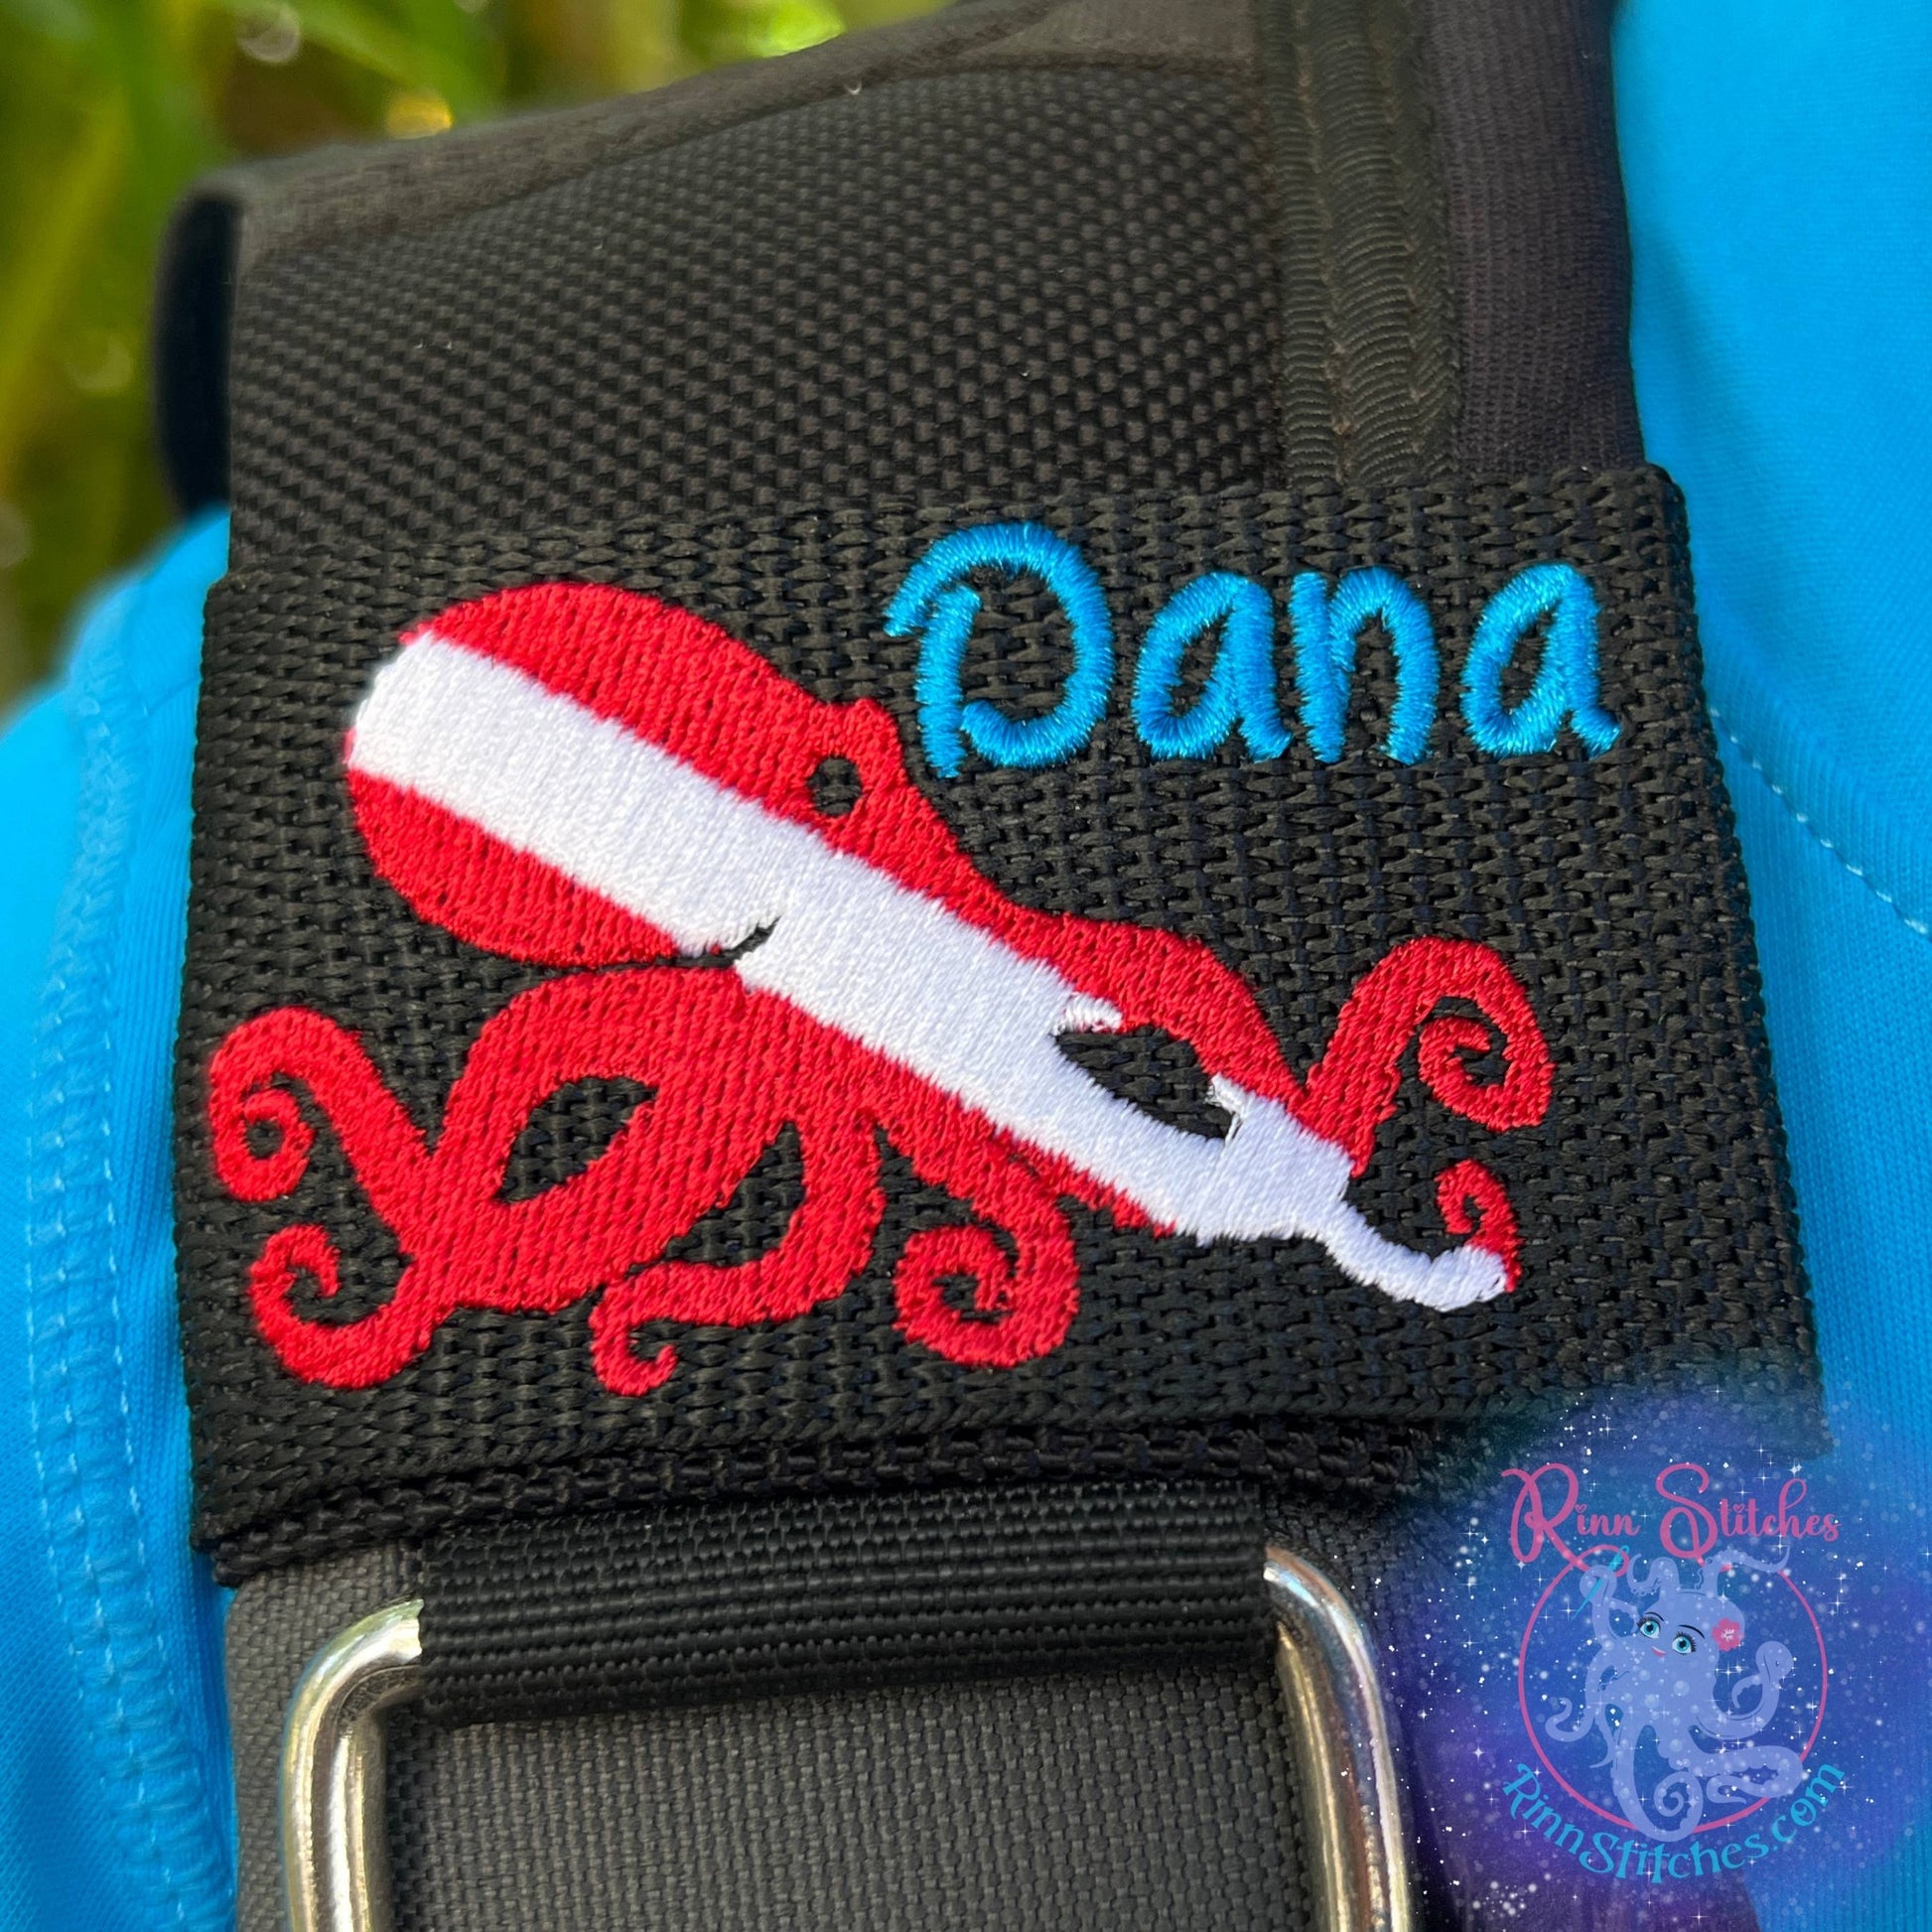 Dive Flag Octopus (Tako) Personalized BCD Tag by Rinn Stitches - Maui, Hawaii